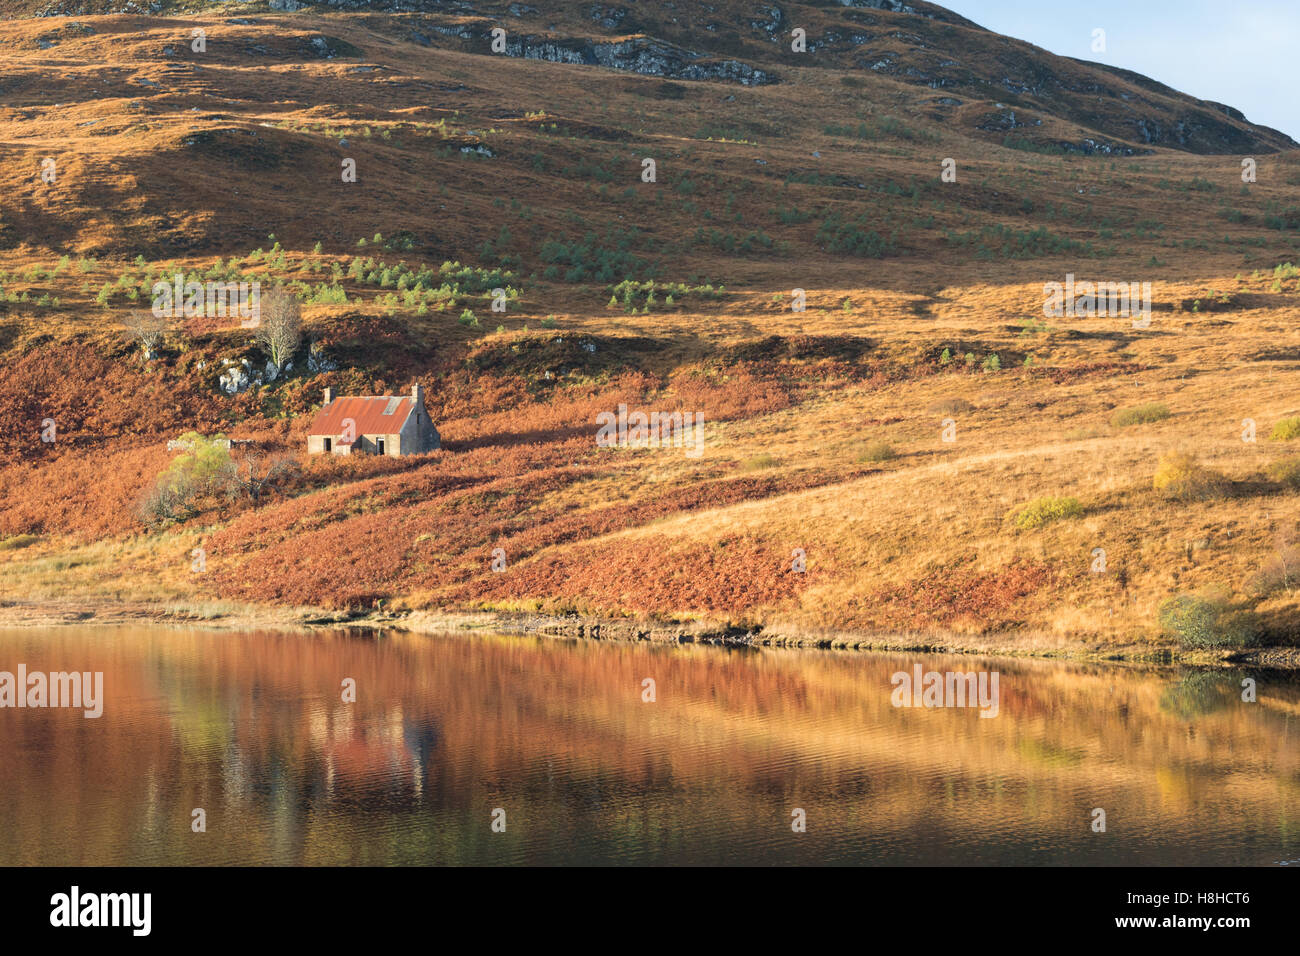 Abandoned cottage on the banks of Loch Bad an Sgalaig, Torridon, Wester Ross, Scotland. Stock Photo